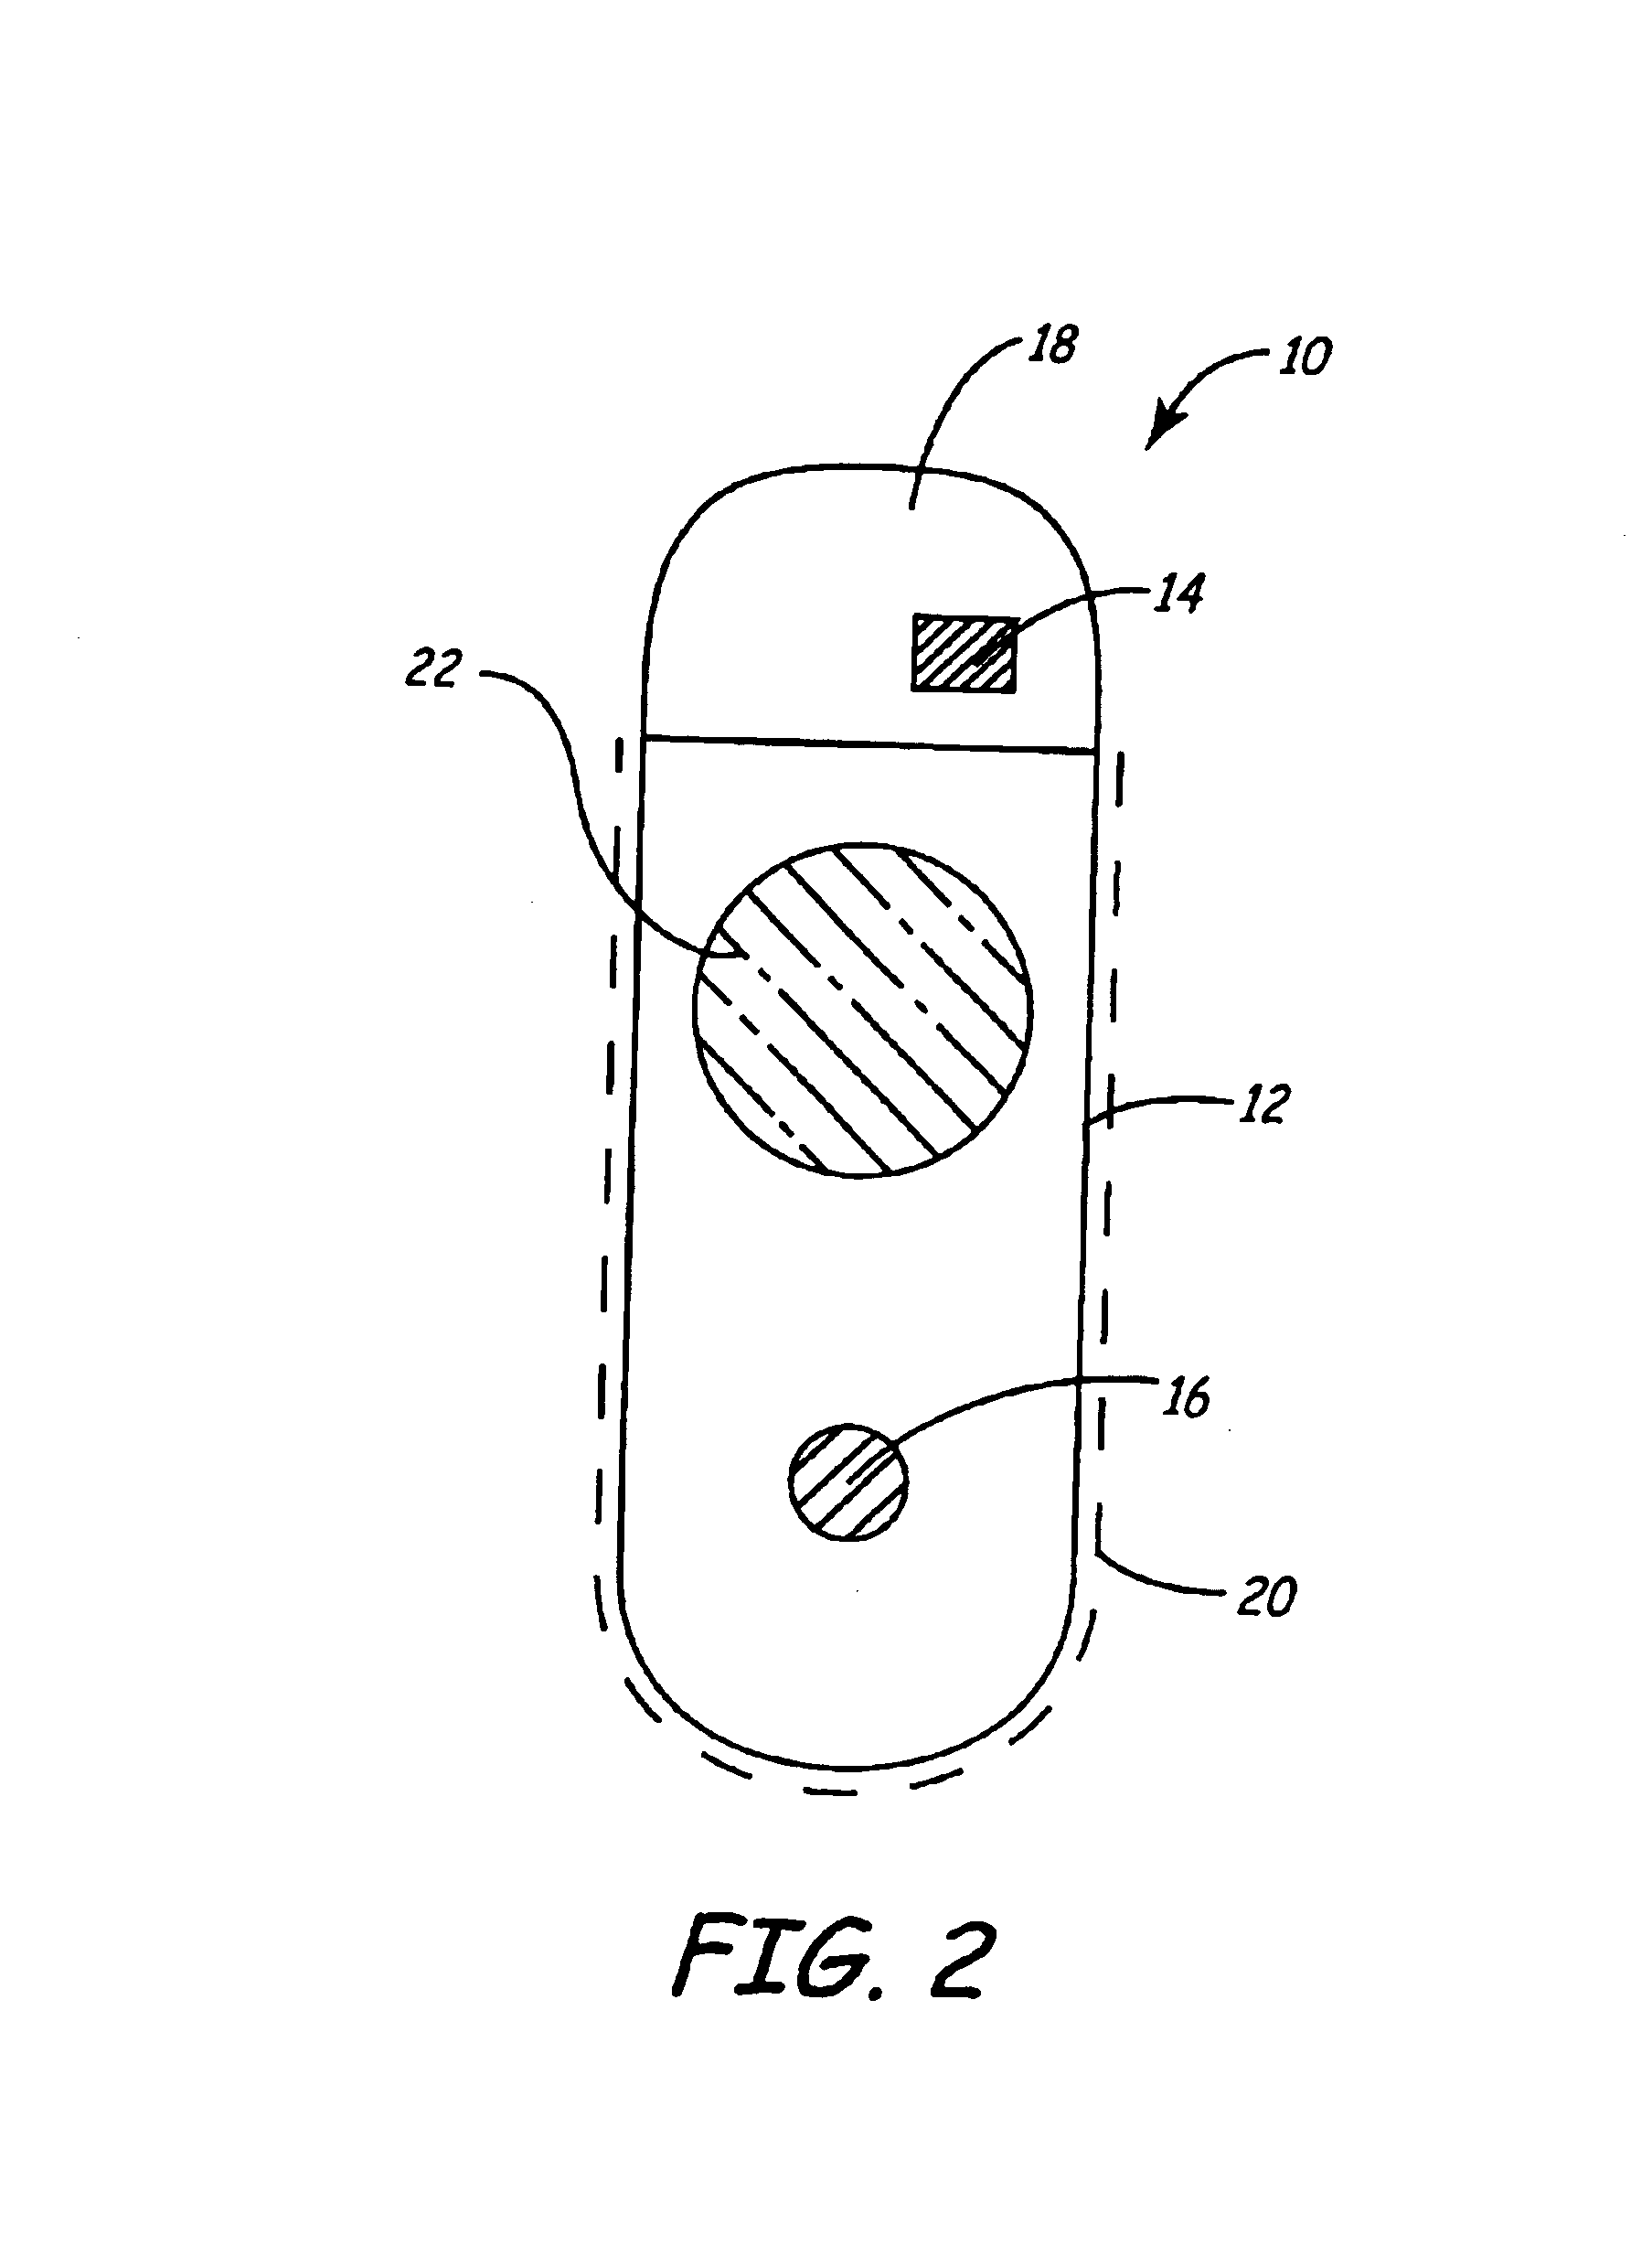 Apparatus and method for chronically monitoring heart sounds for deriving estimated blood pressure